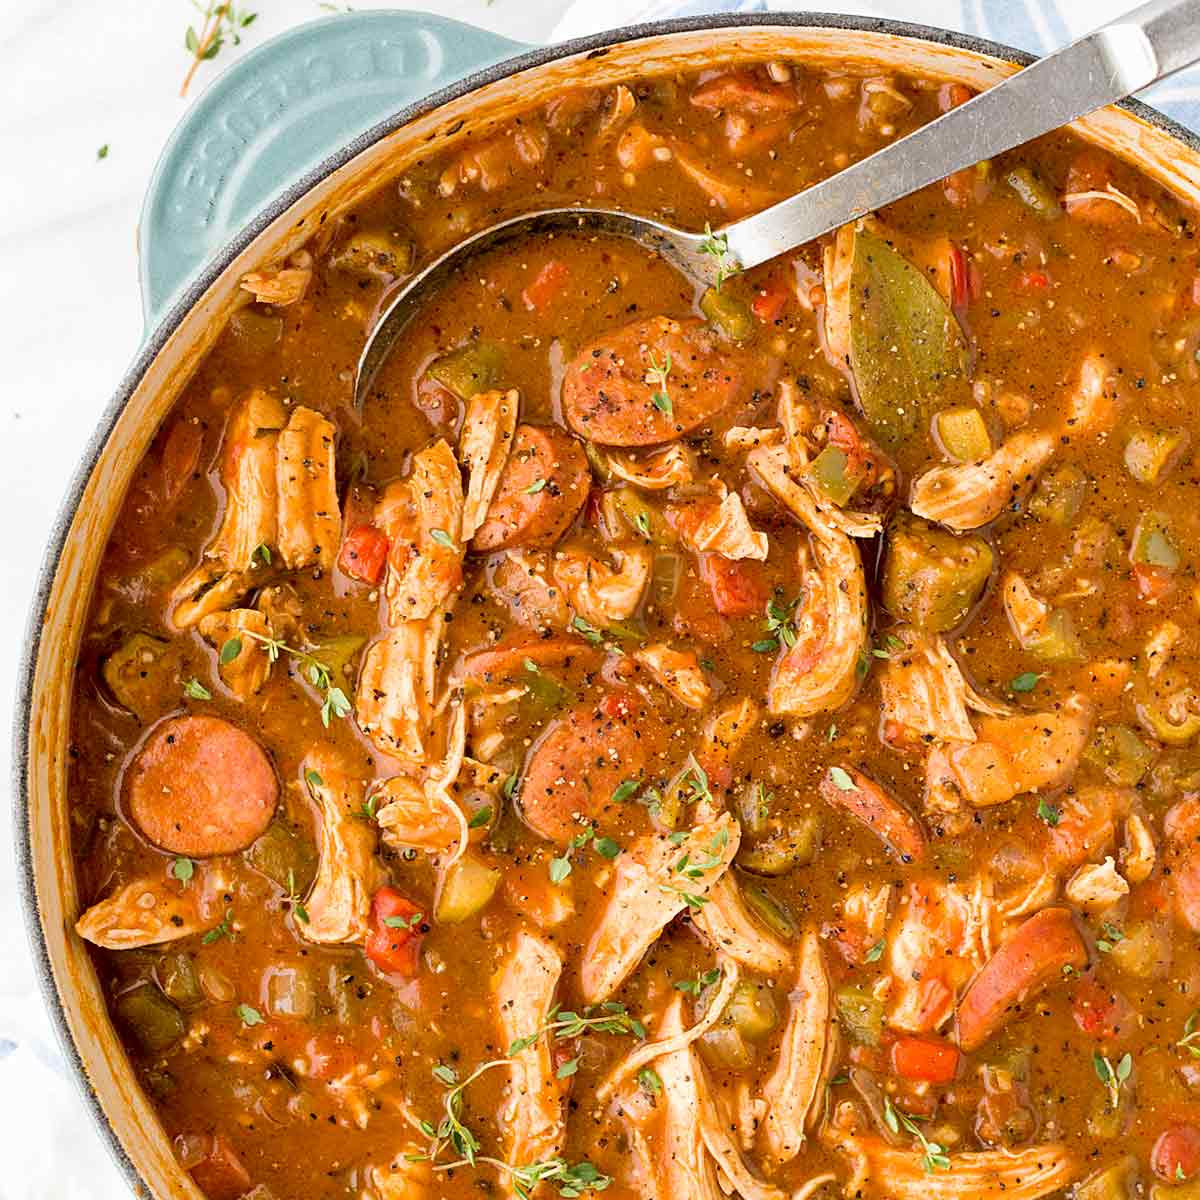 Gumbo Recipe Seafood Chicken And Sausage
 calories in chicken and sausage gumbo without rice